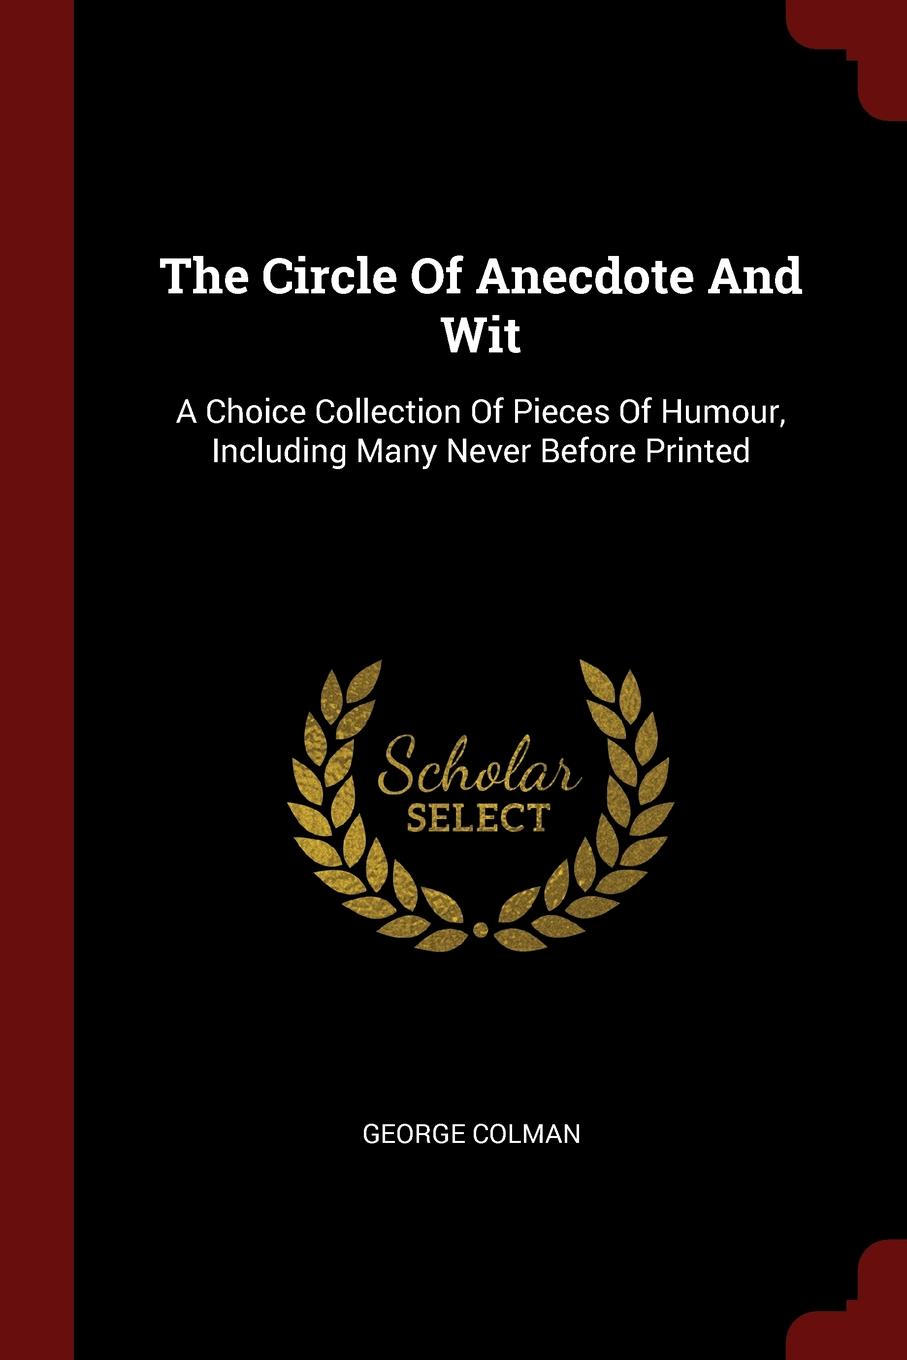 The Circle Of Anecdote And Wit. A Choice Collection Of Pieces Of Humour, Including Many Never Before Printed